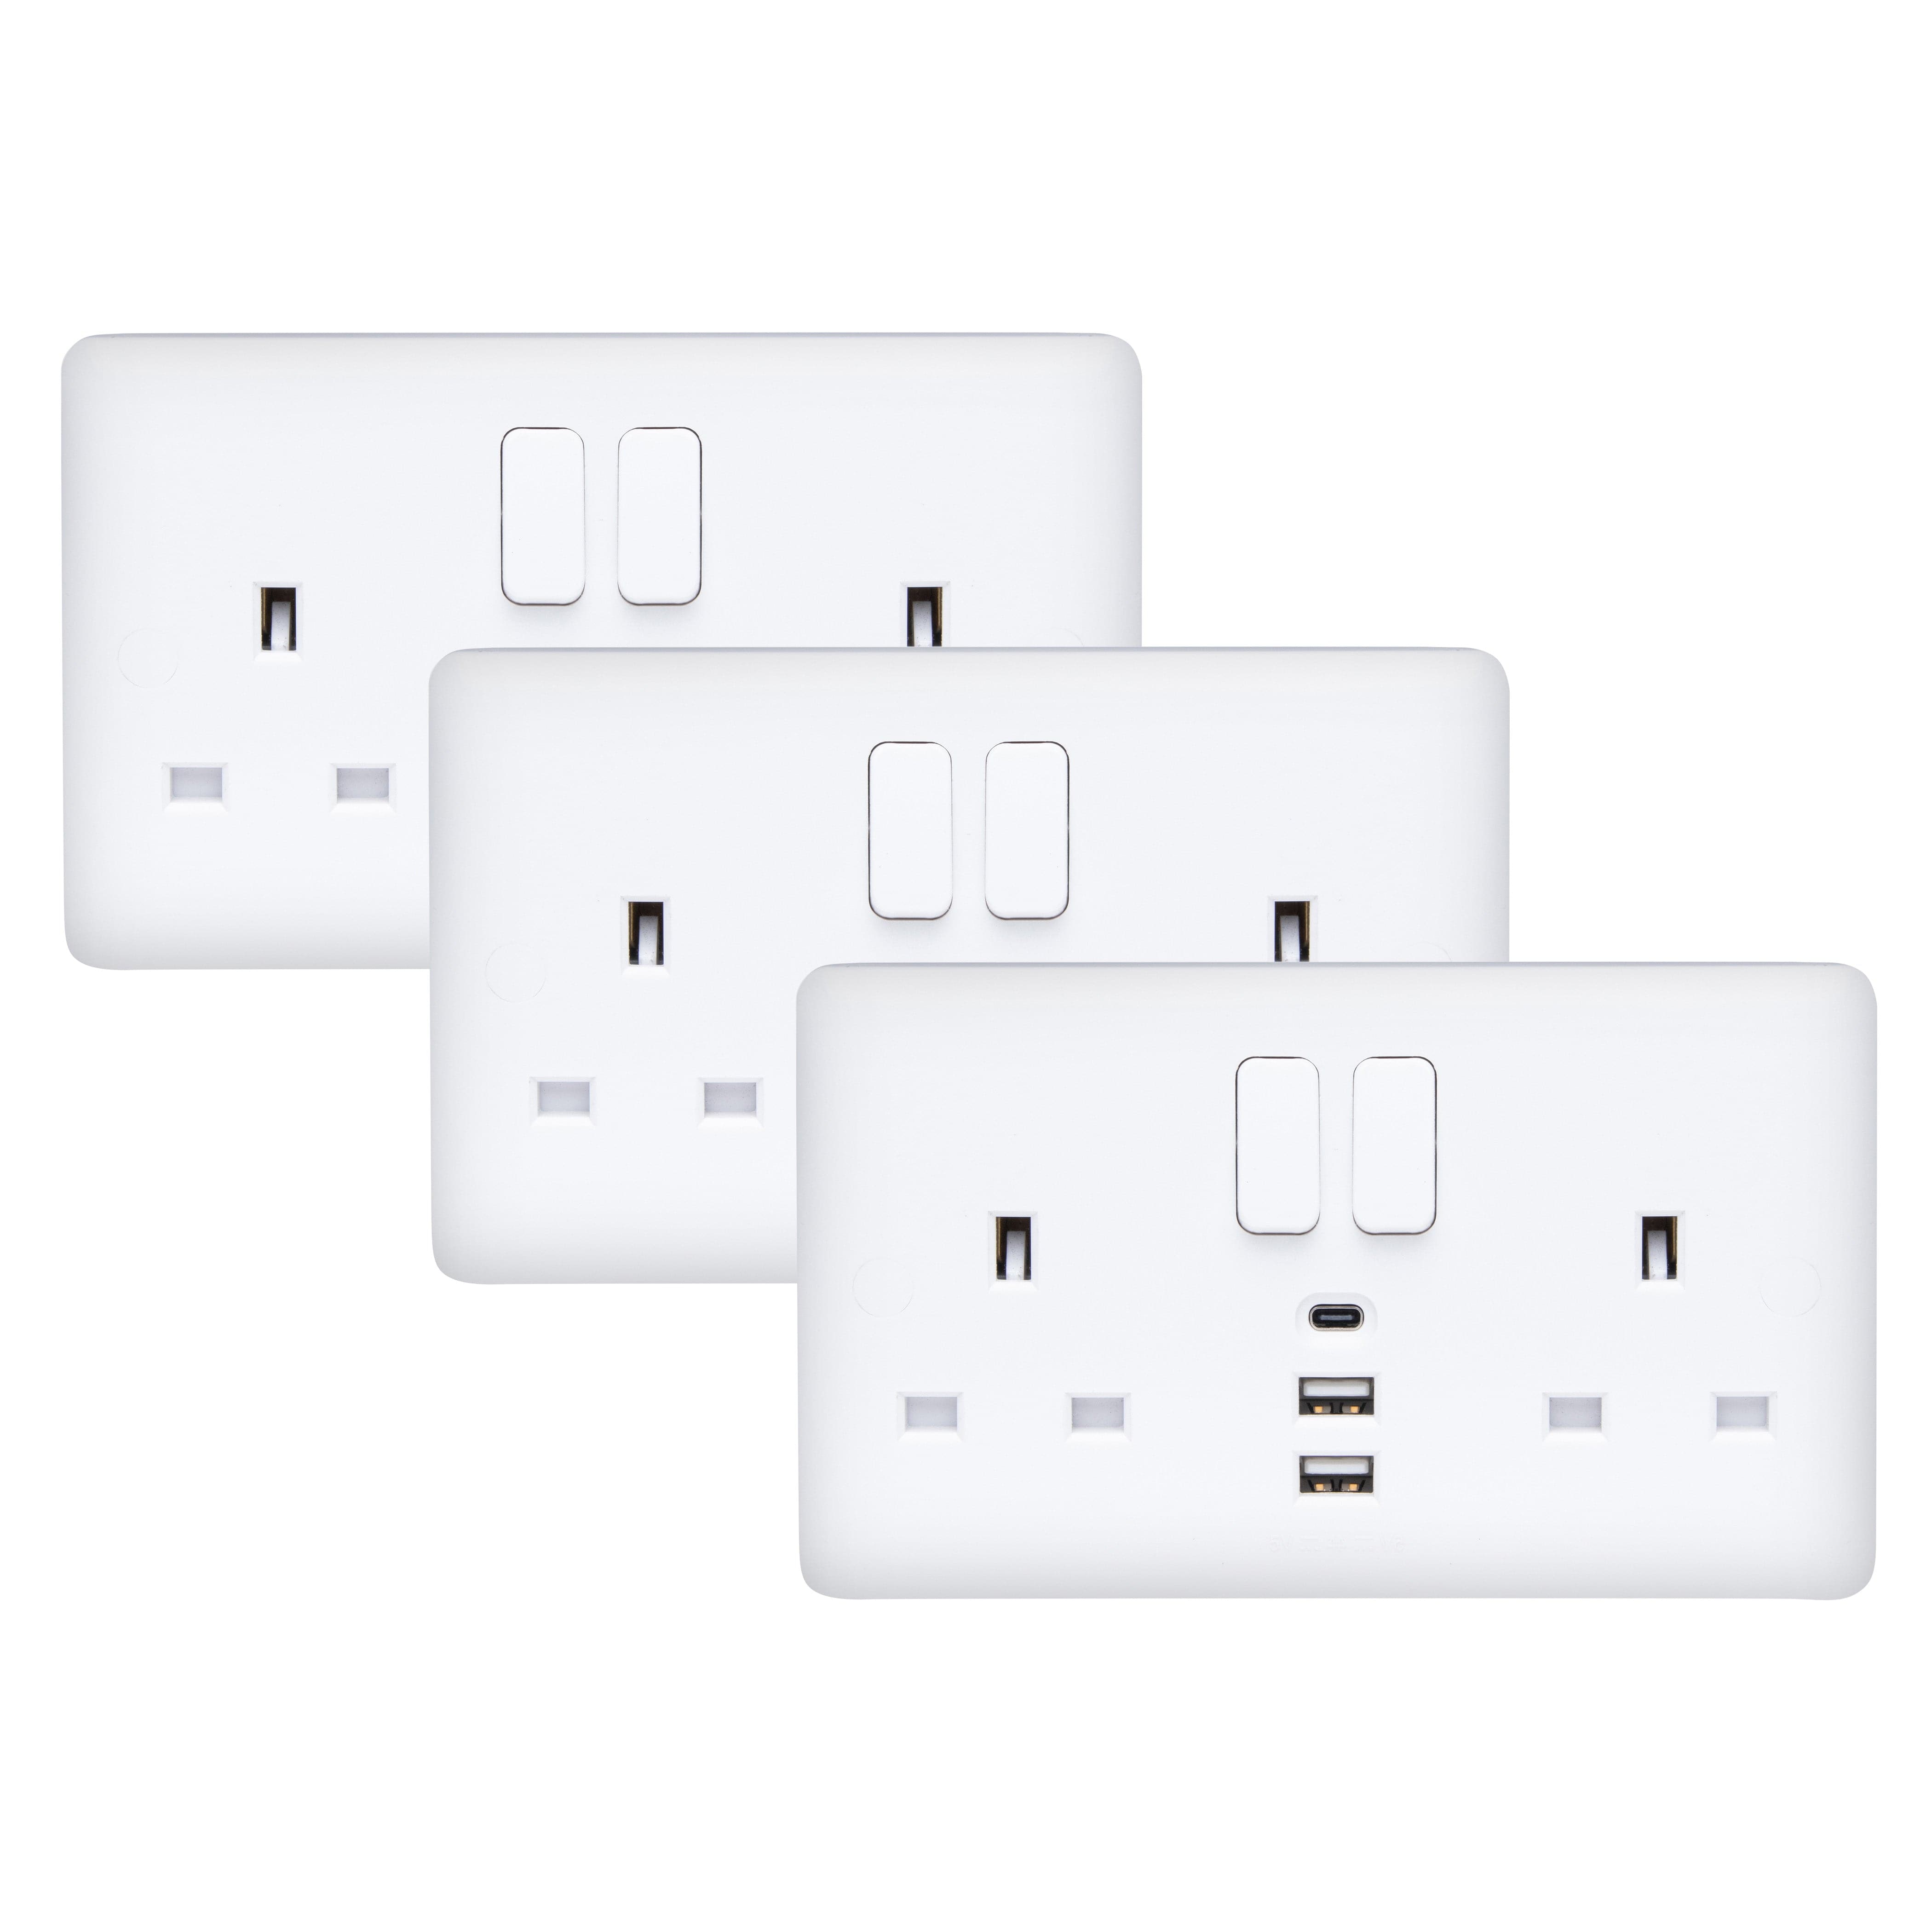 Deta 13A 2 Gang Switched Socket with 2x USB-A / 1x USB-C Ports (Pack of 3)